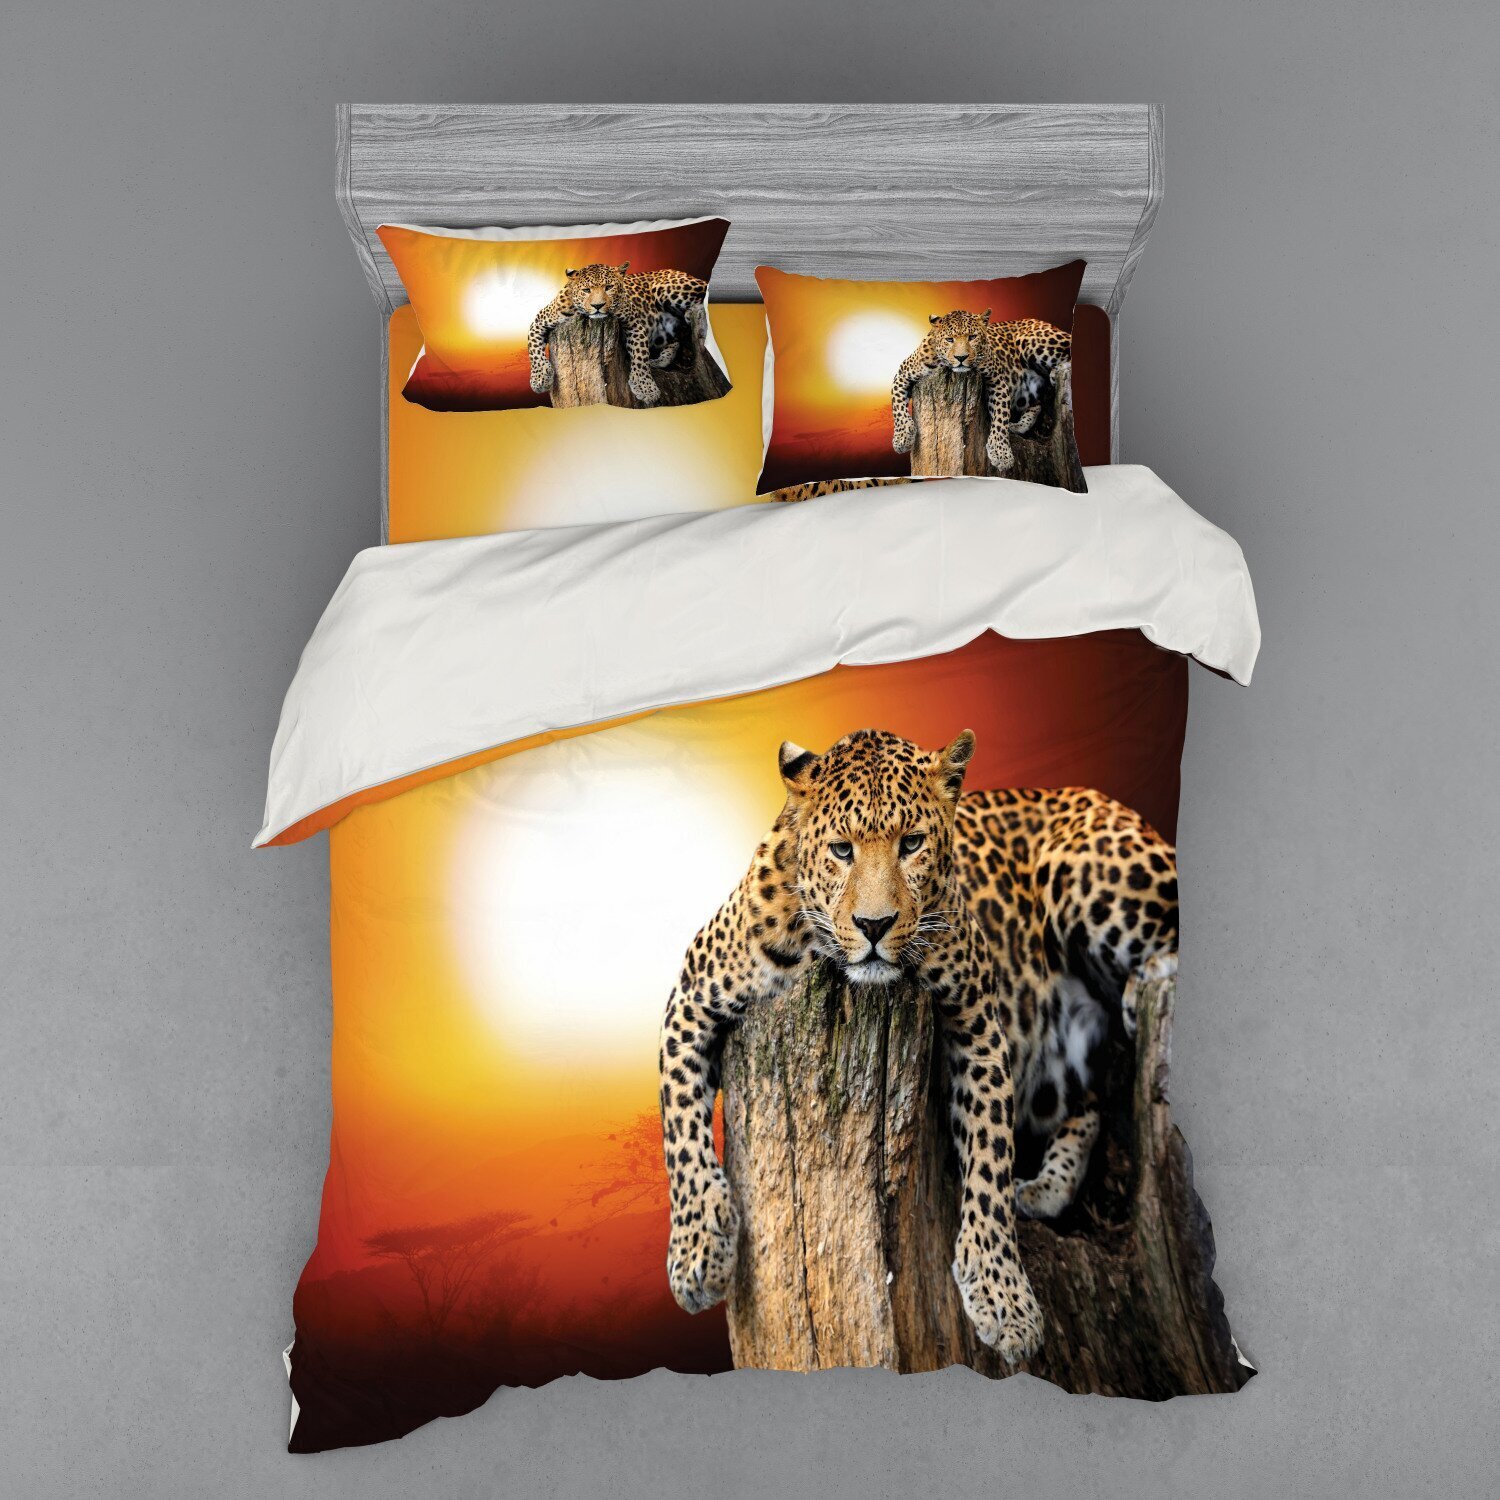 Bright and Colorful Leopard Print Comforter Set